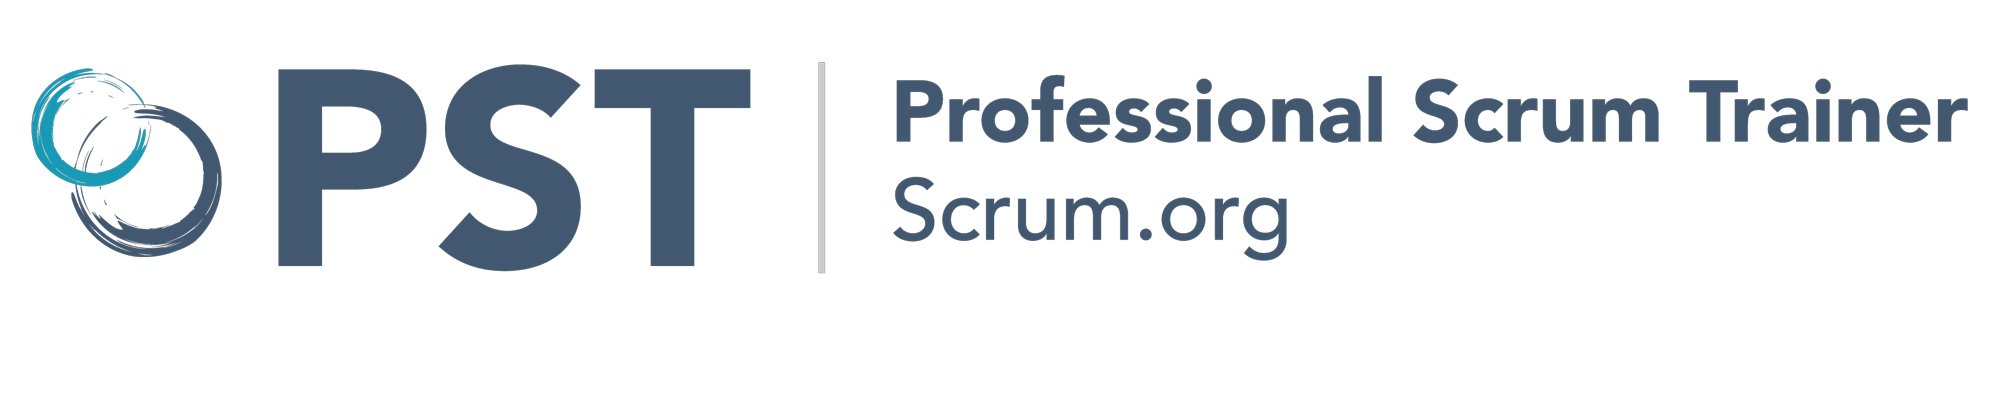 PST Professional Scrum Trainer Stefan Wolpers